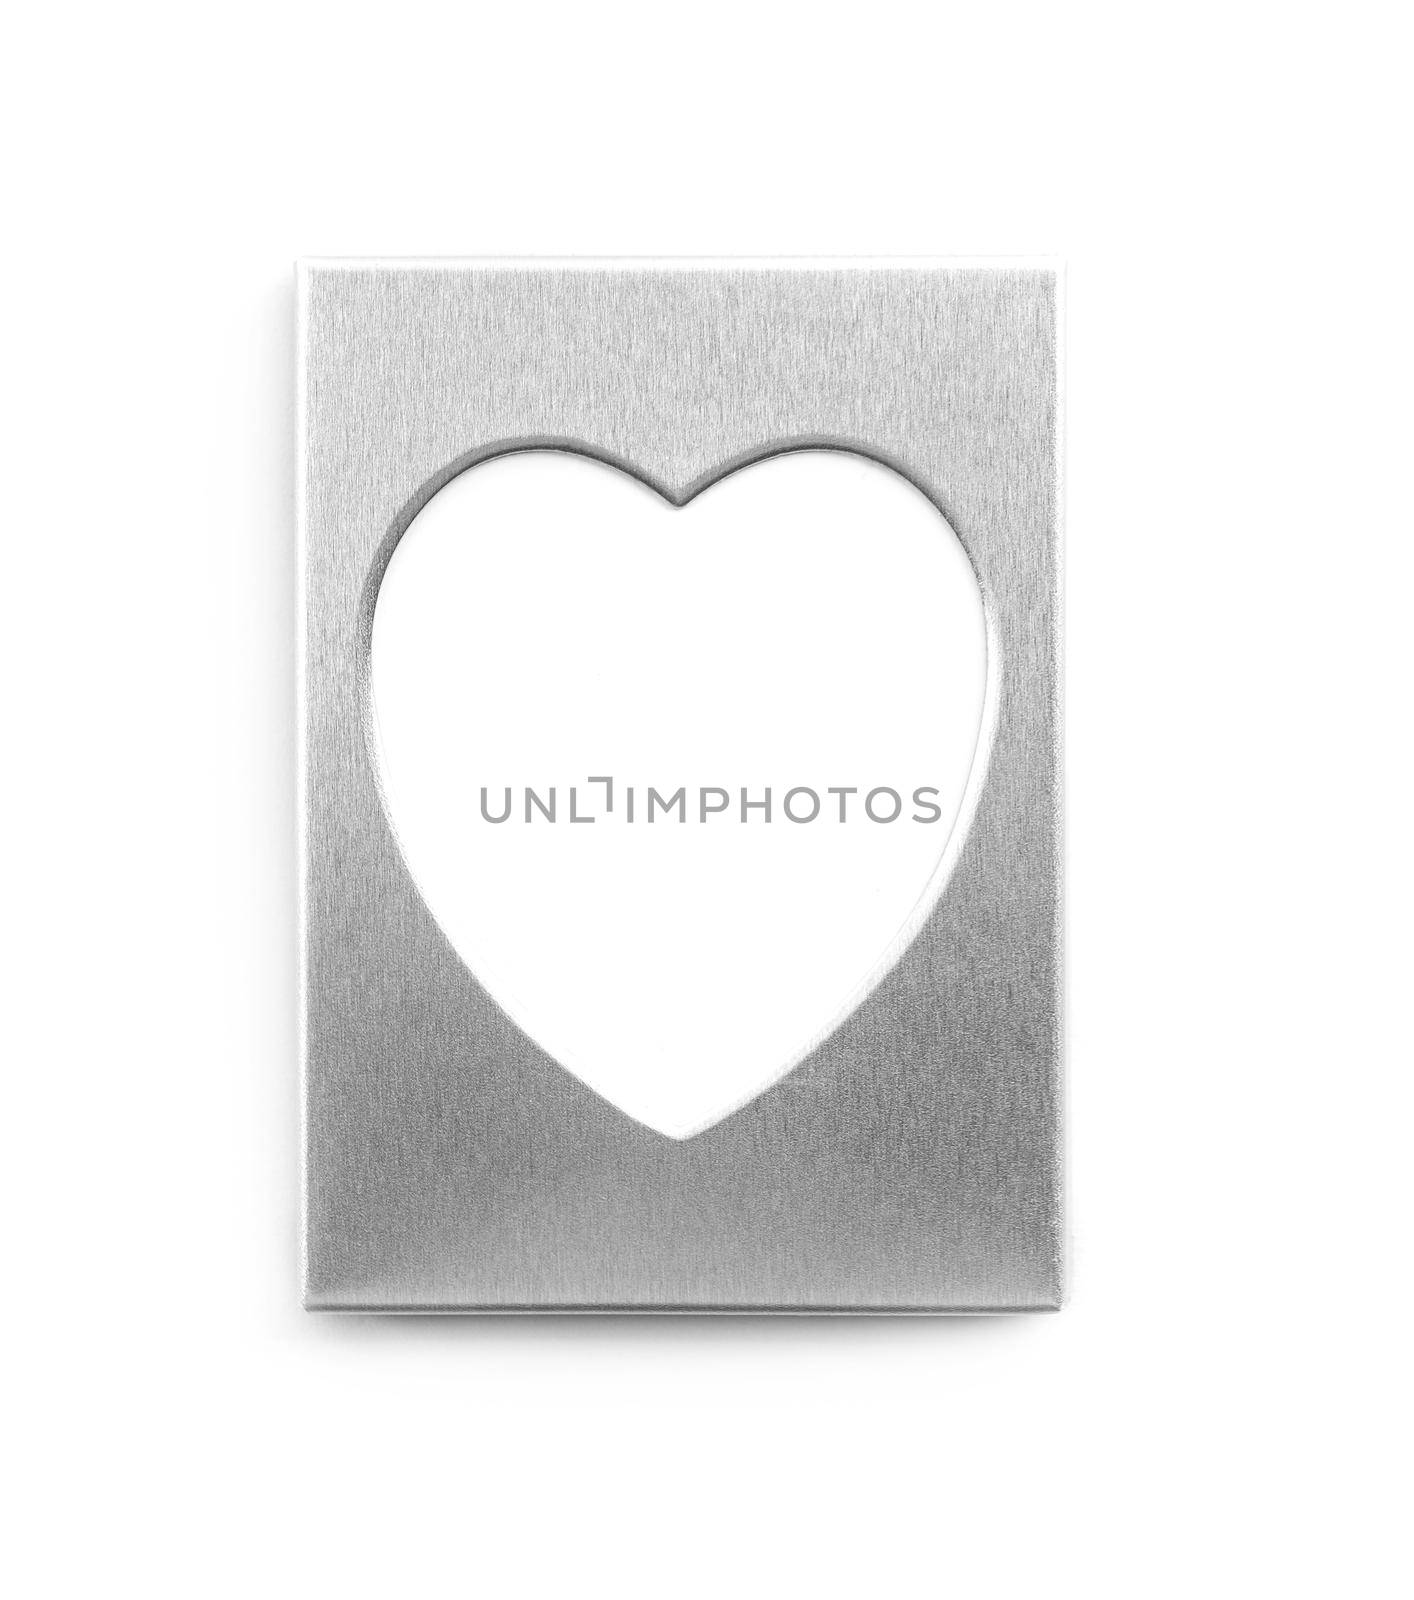 Silver frame in shape of heart isolated on white background